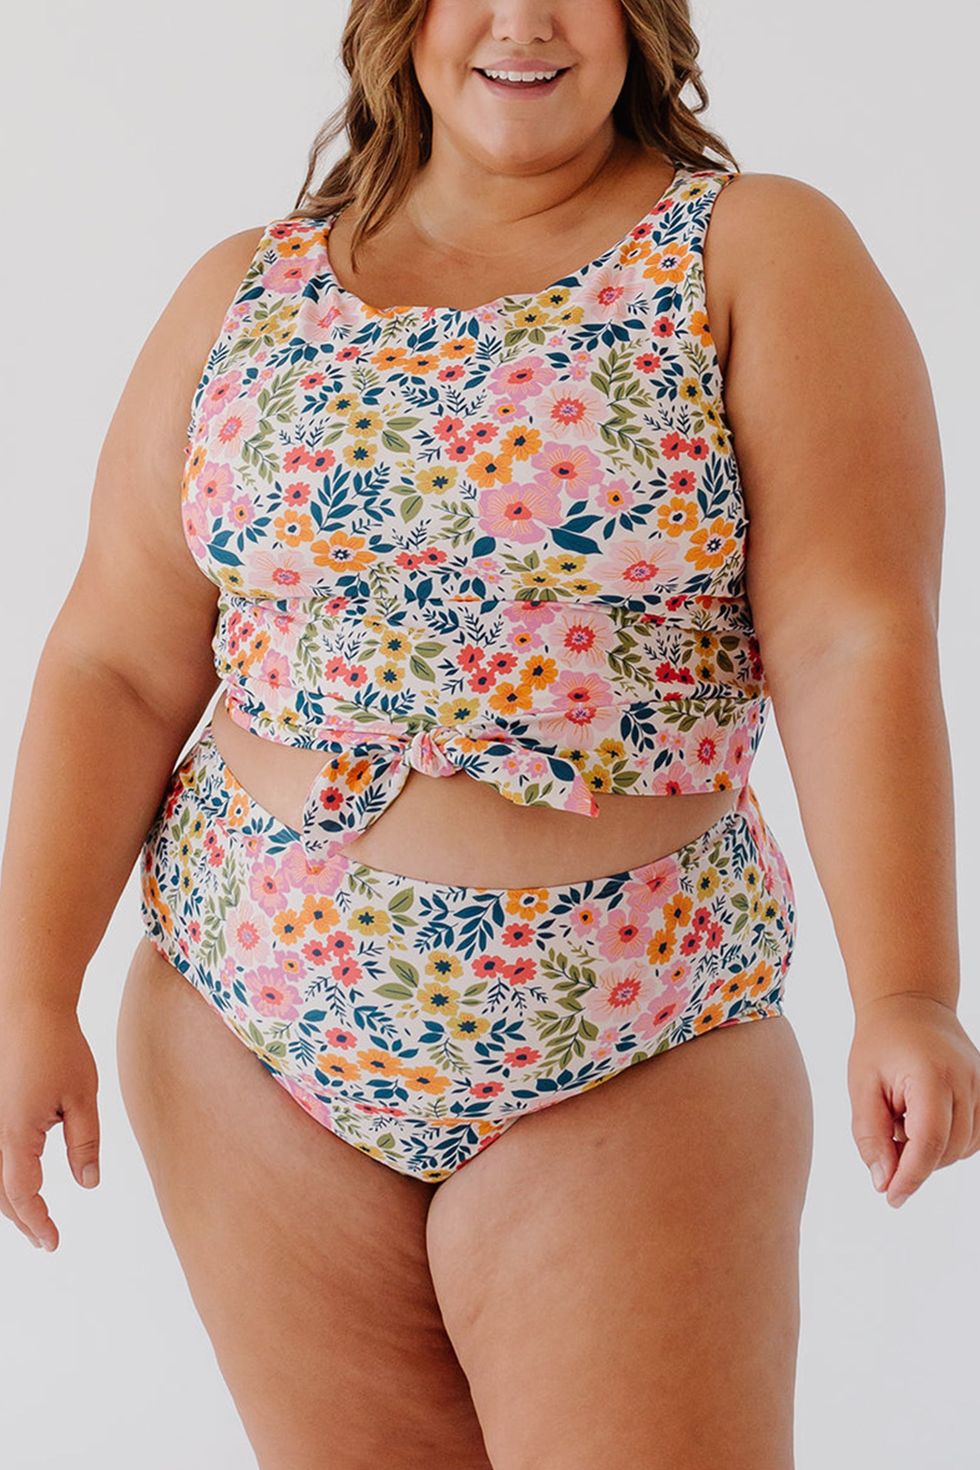 Flattering Swimsuits For Plus-Size Women